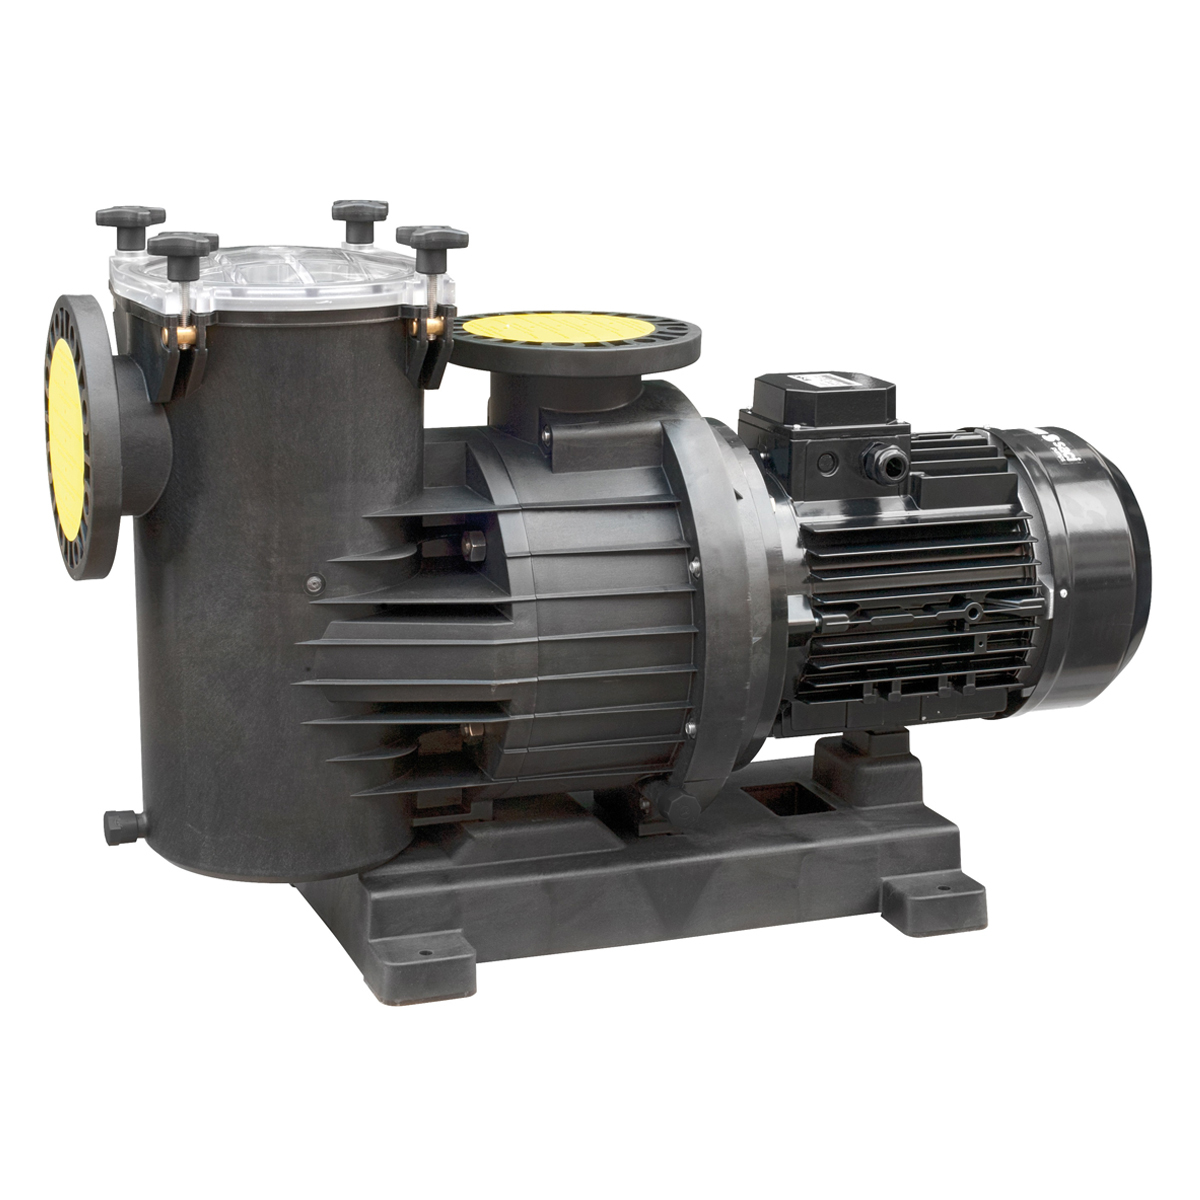 Smart Power Filter Pump 550 230-400V, 1450 rpm 4 kW, 5,5 HP, 84 m3/h at 10m Smart Power Filter Pump 550 230-400V, 1450 rpm 4 kW, 5,5 HP, 84 m3/h at 10m